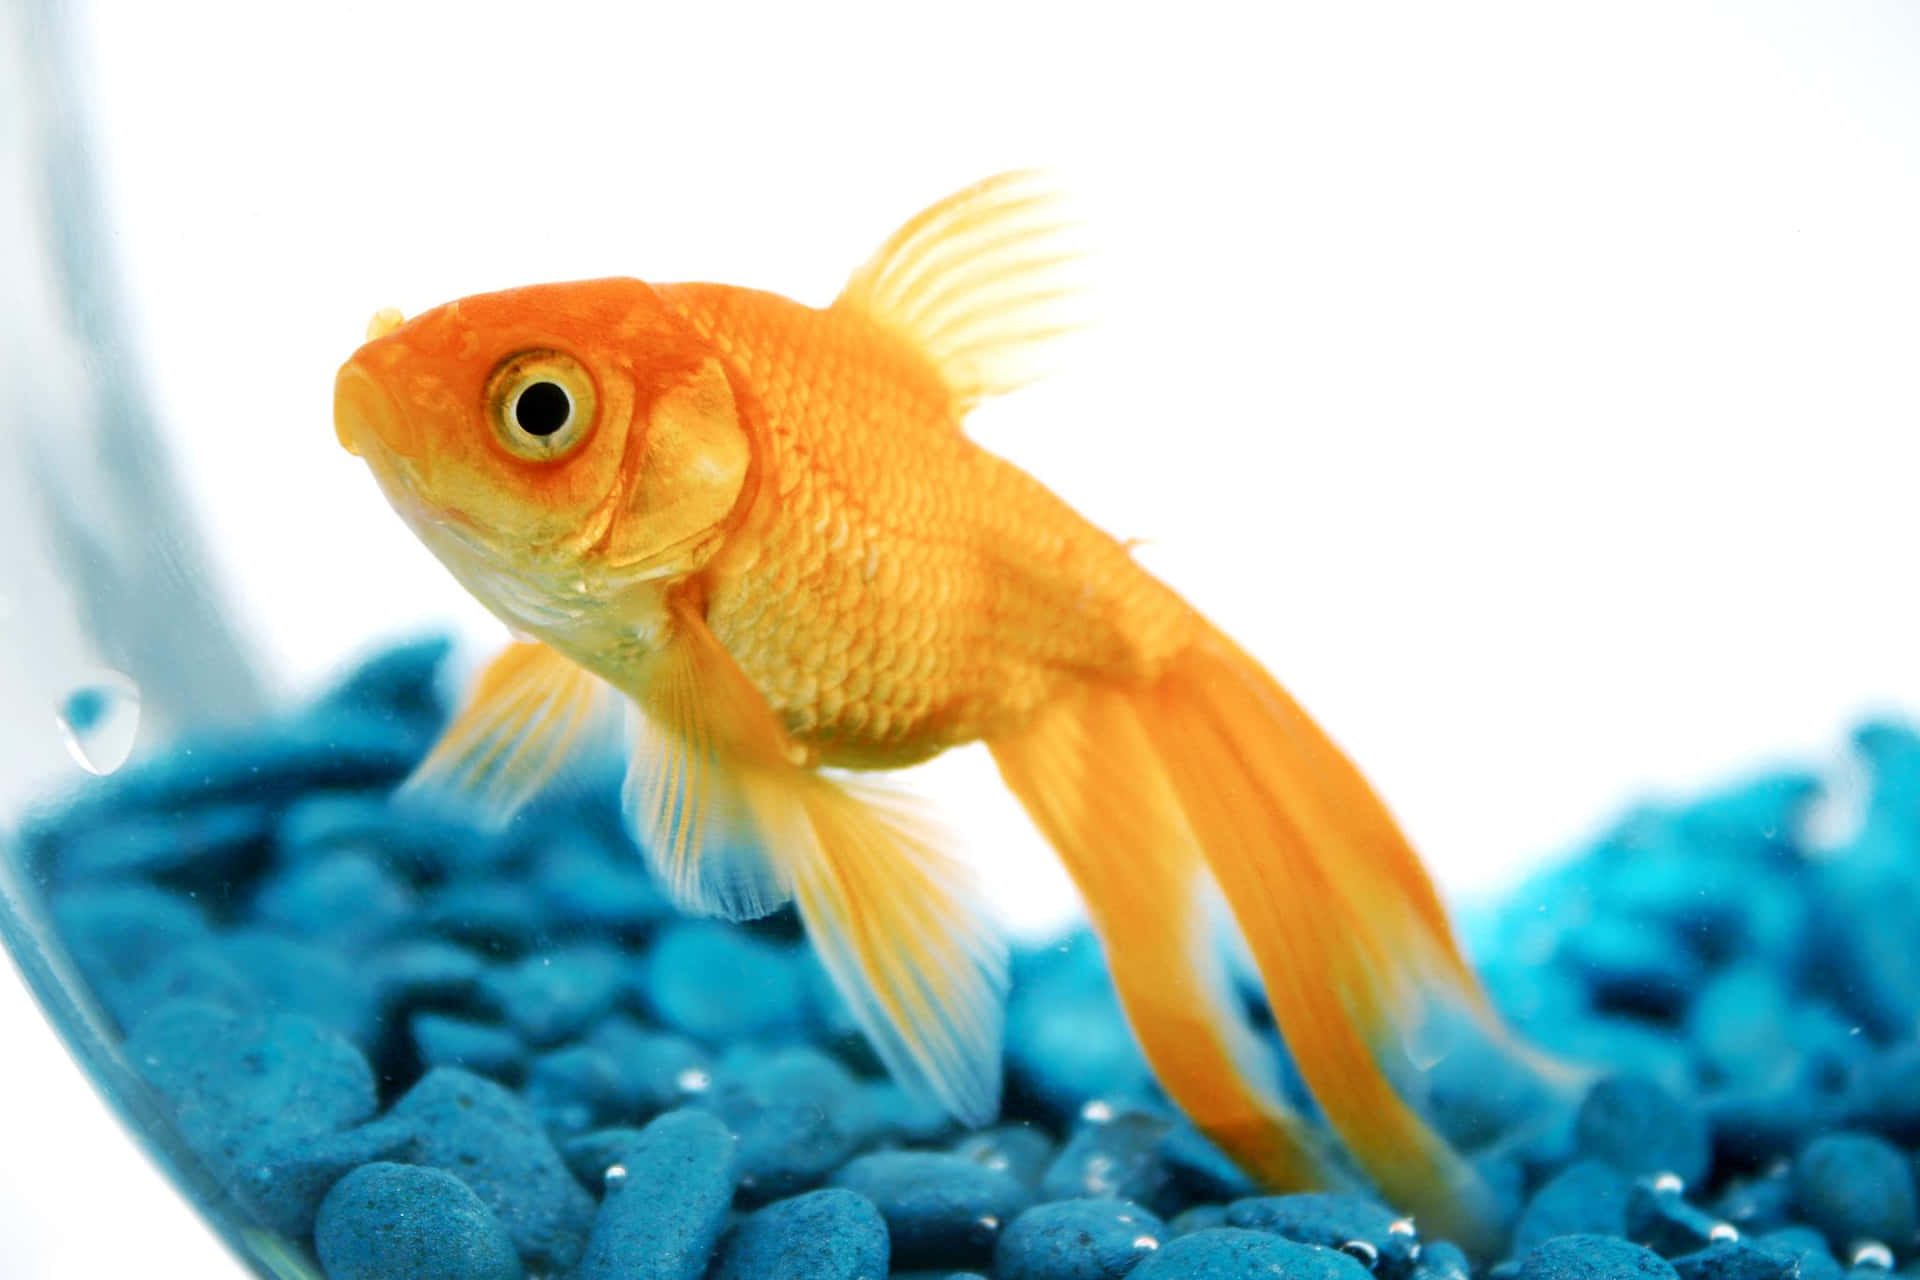 An adorable goldfish against a bright blue backdrop.